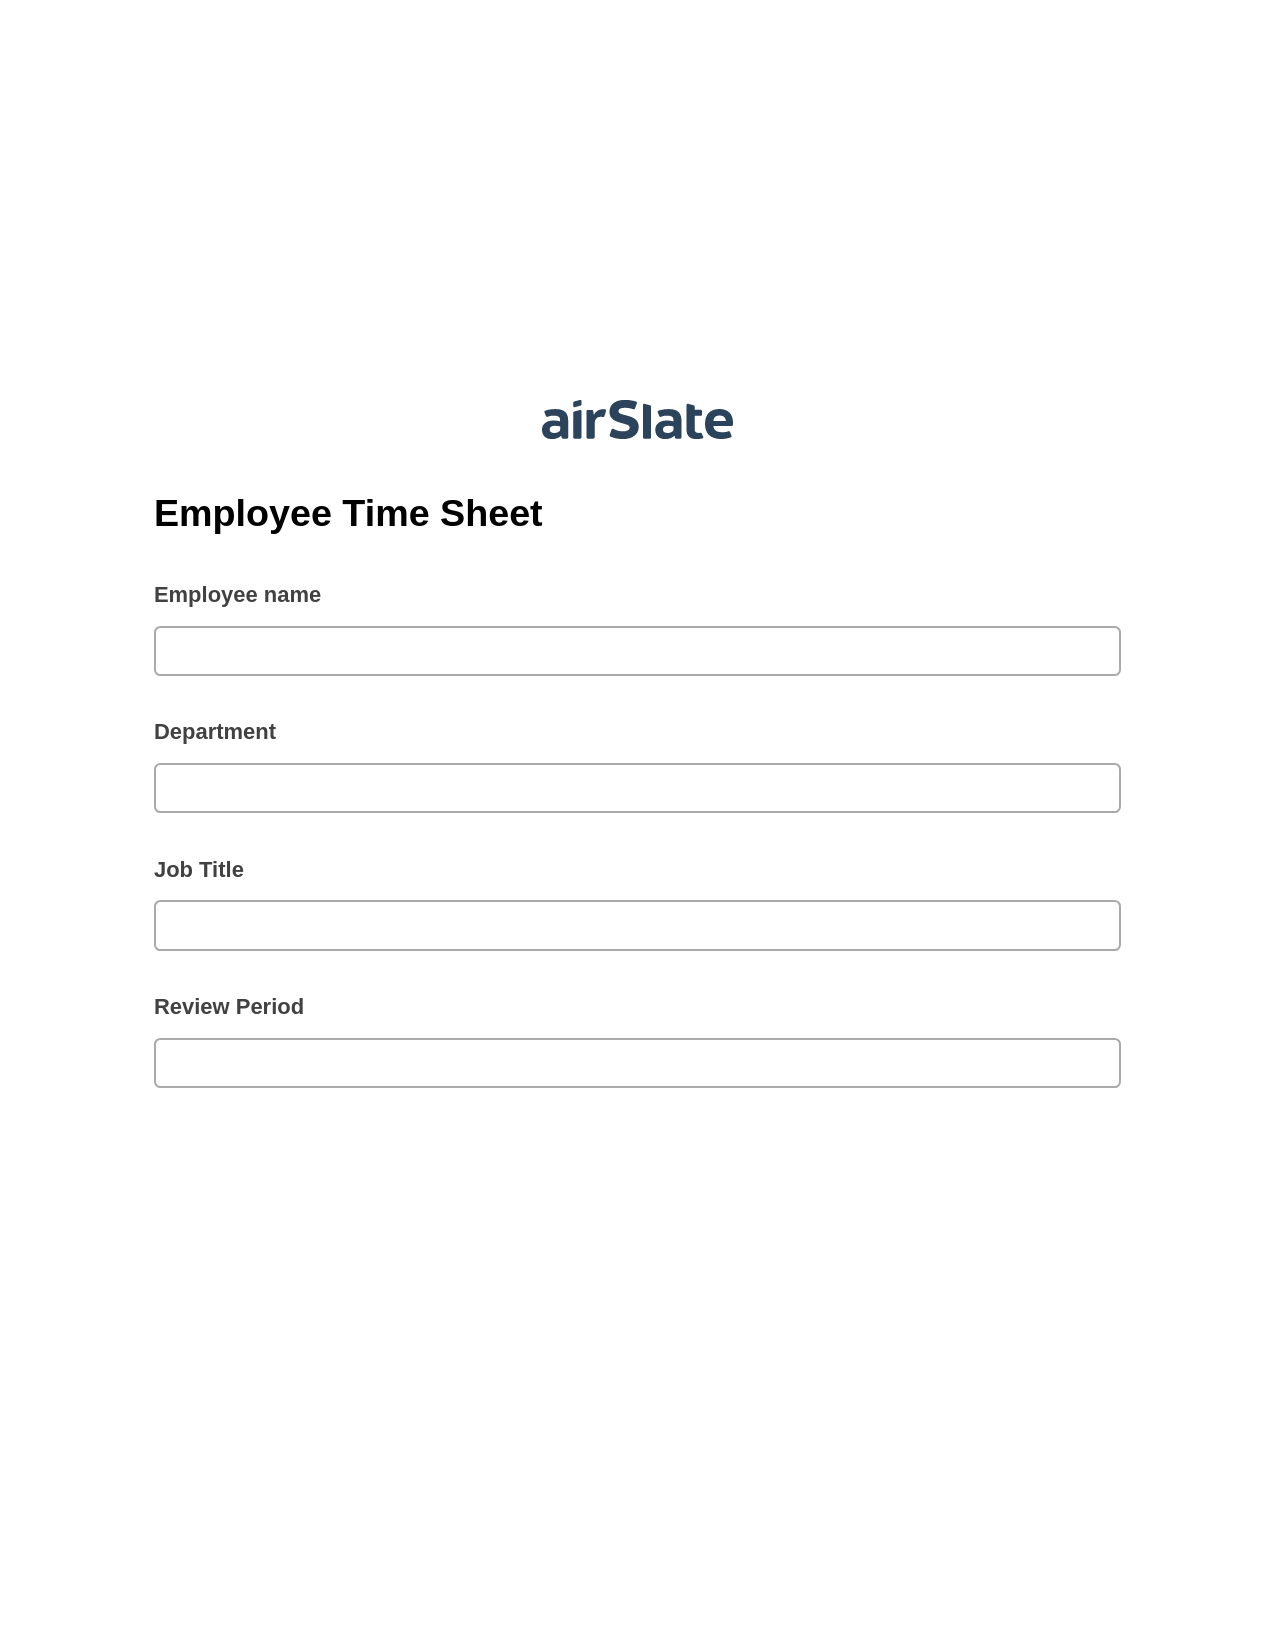 Multirole Employee Time Sheet Pre-fill Dropdowns from CSV file Bot, Create Salesforce Records Bot, Archive to Dropbox Bot